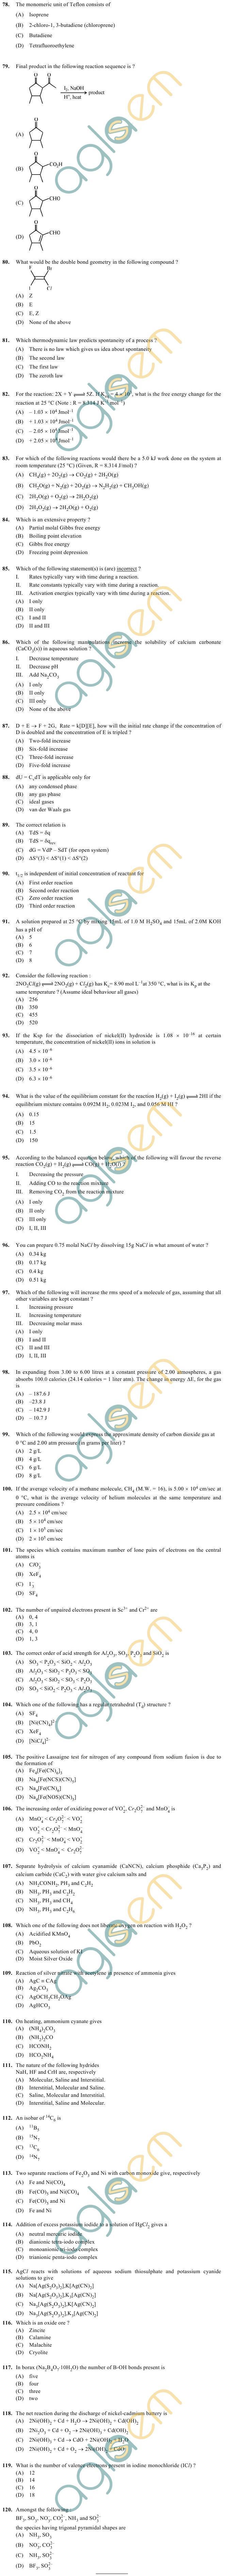 OJEE 2013 Question Paper for PHY/CHEM